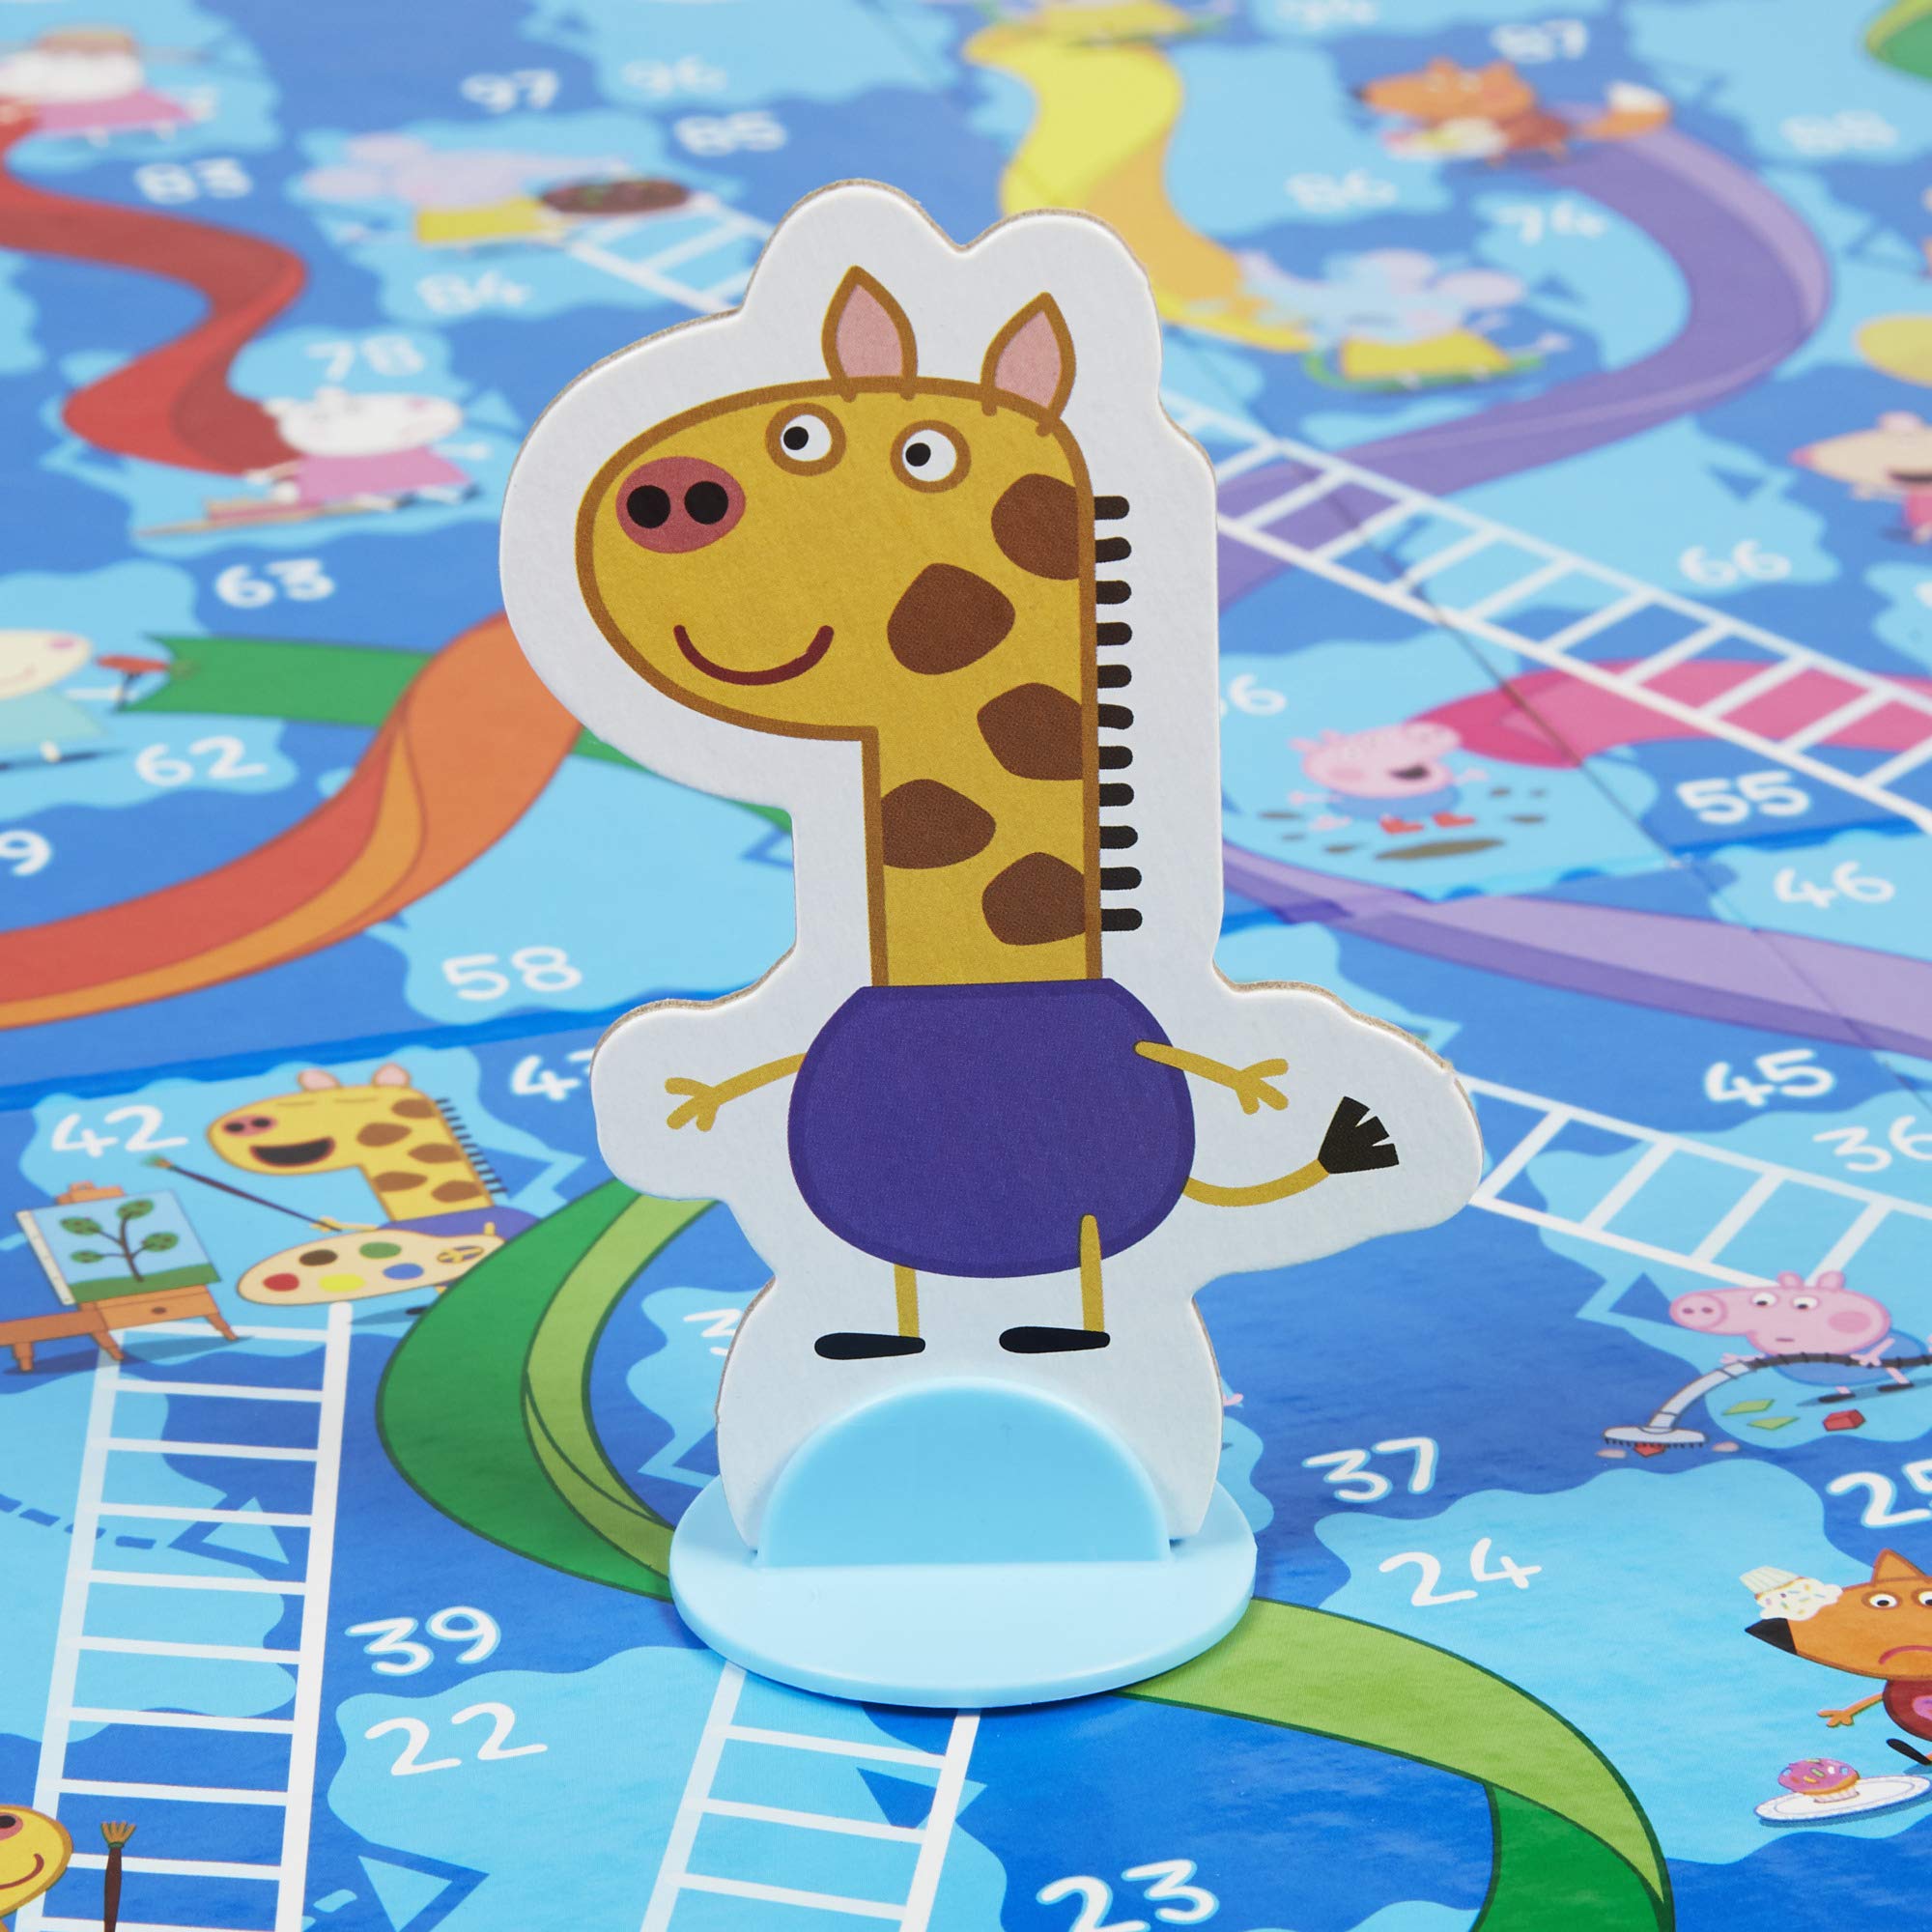 Chutes and Ladders: Peppa Pig Edition Board Game for Kids Ages 3 and Up, Preschool Games for 2-4 Players